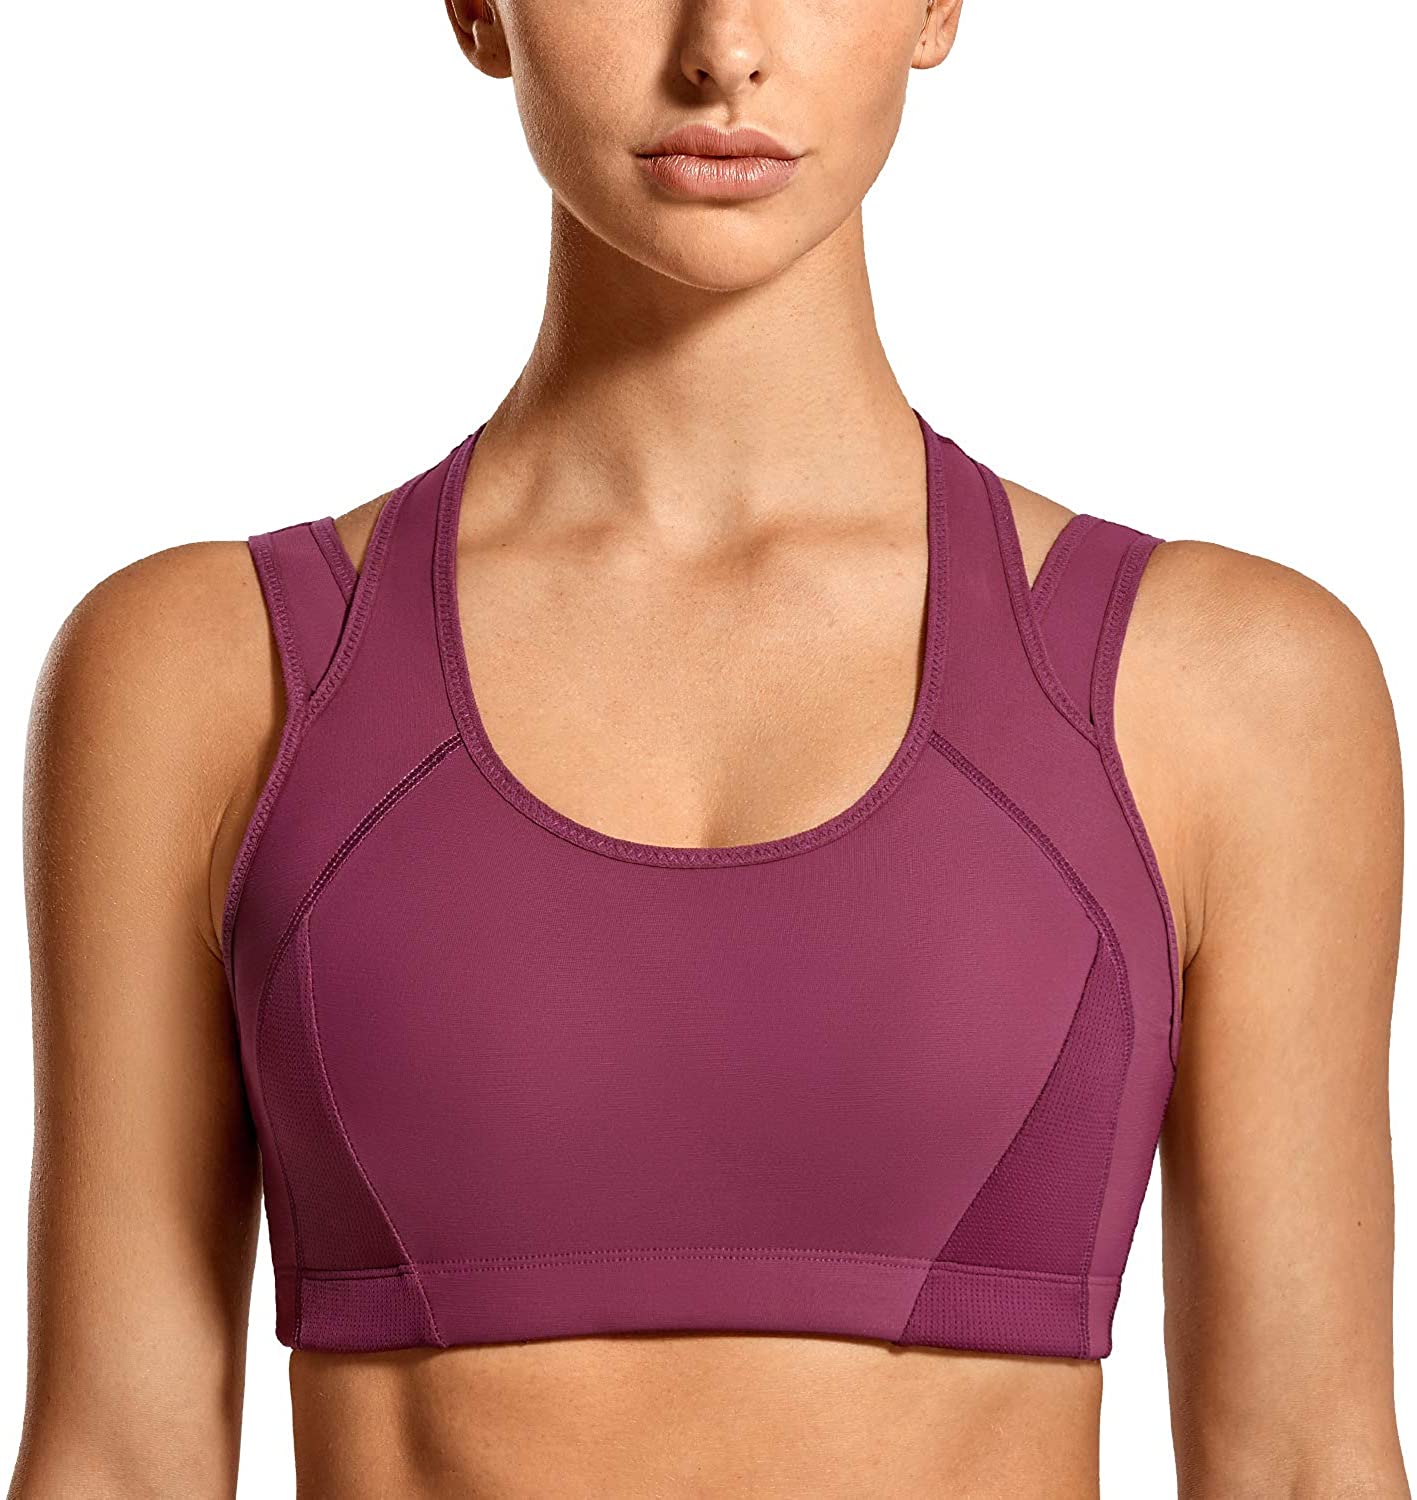 Syrokan Womens Workout Sports Bra High Impact Support Wirefree Mesh 4153